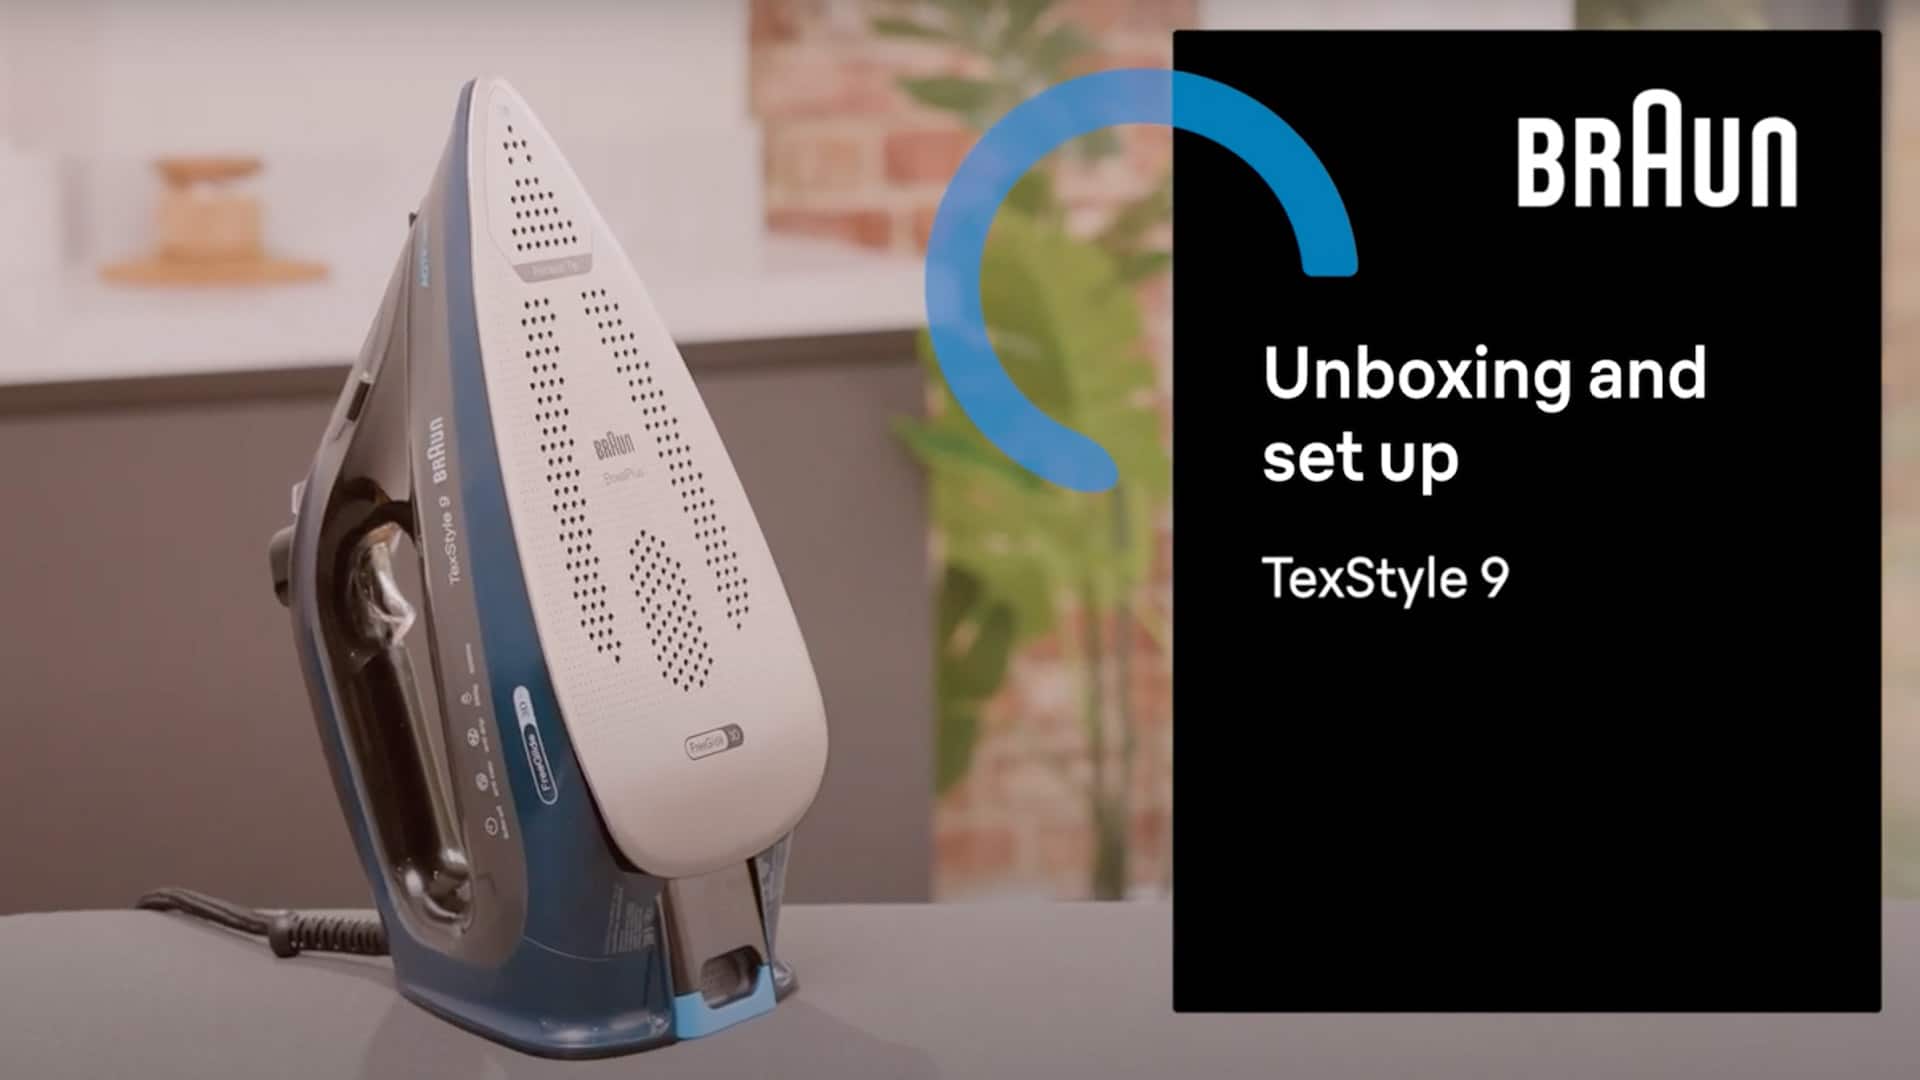 Braun TexStyle 9 How to – Unboxing and set up